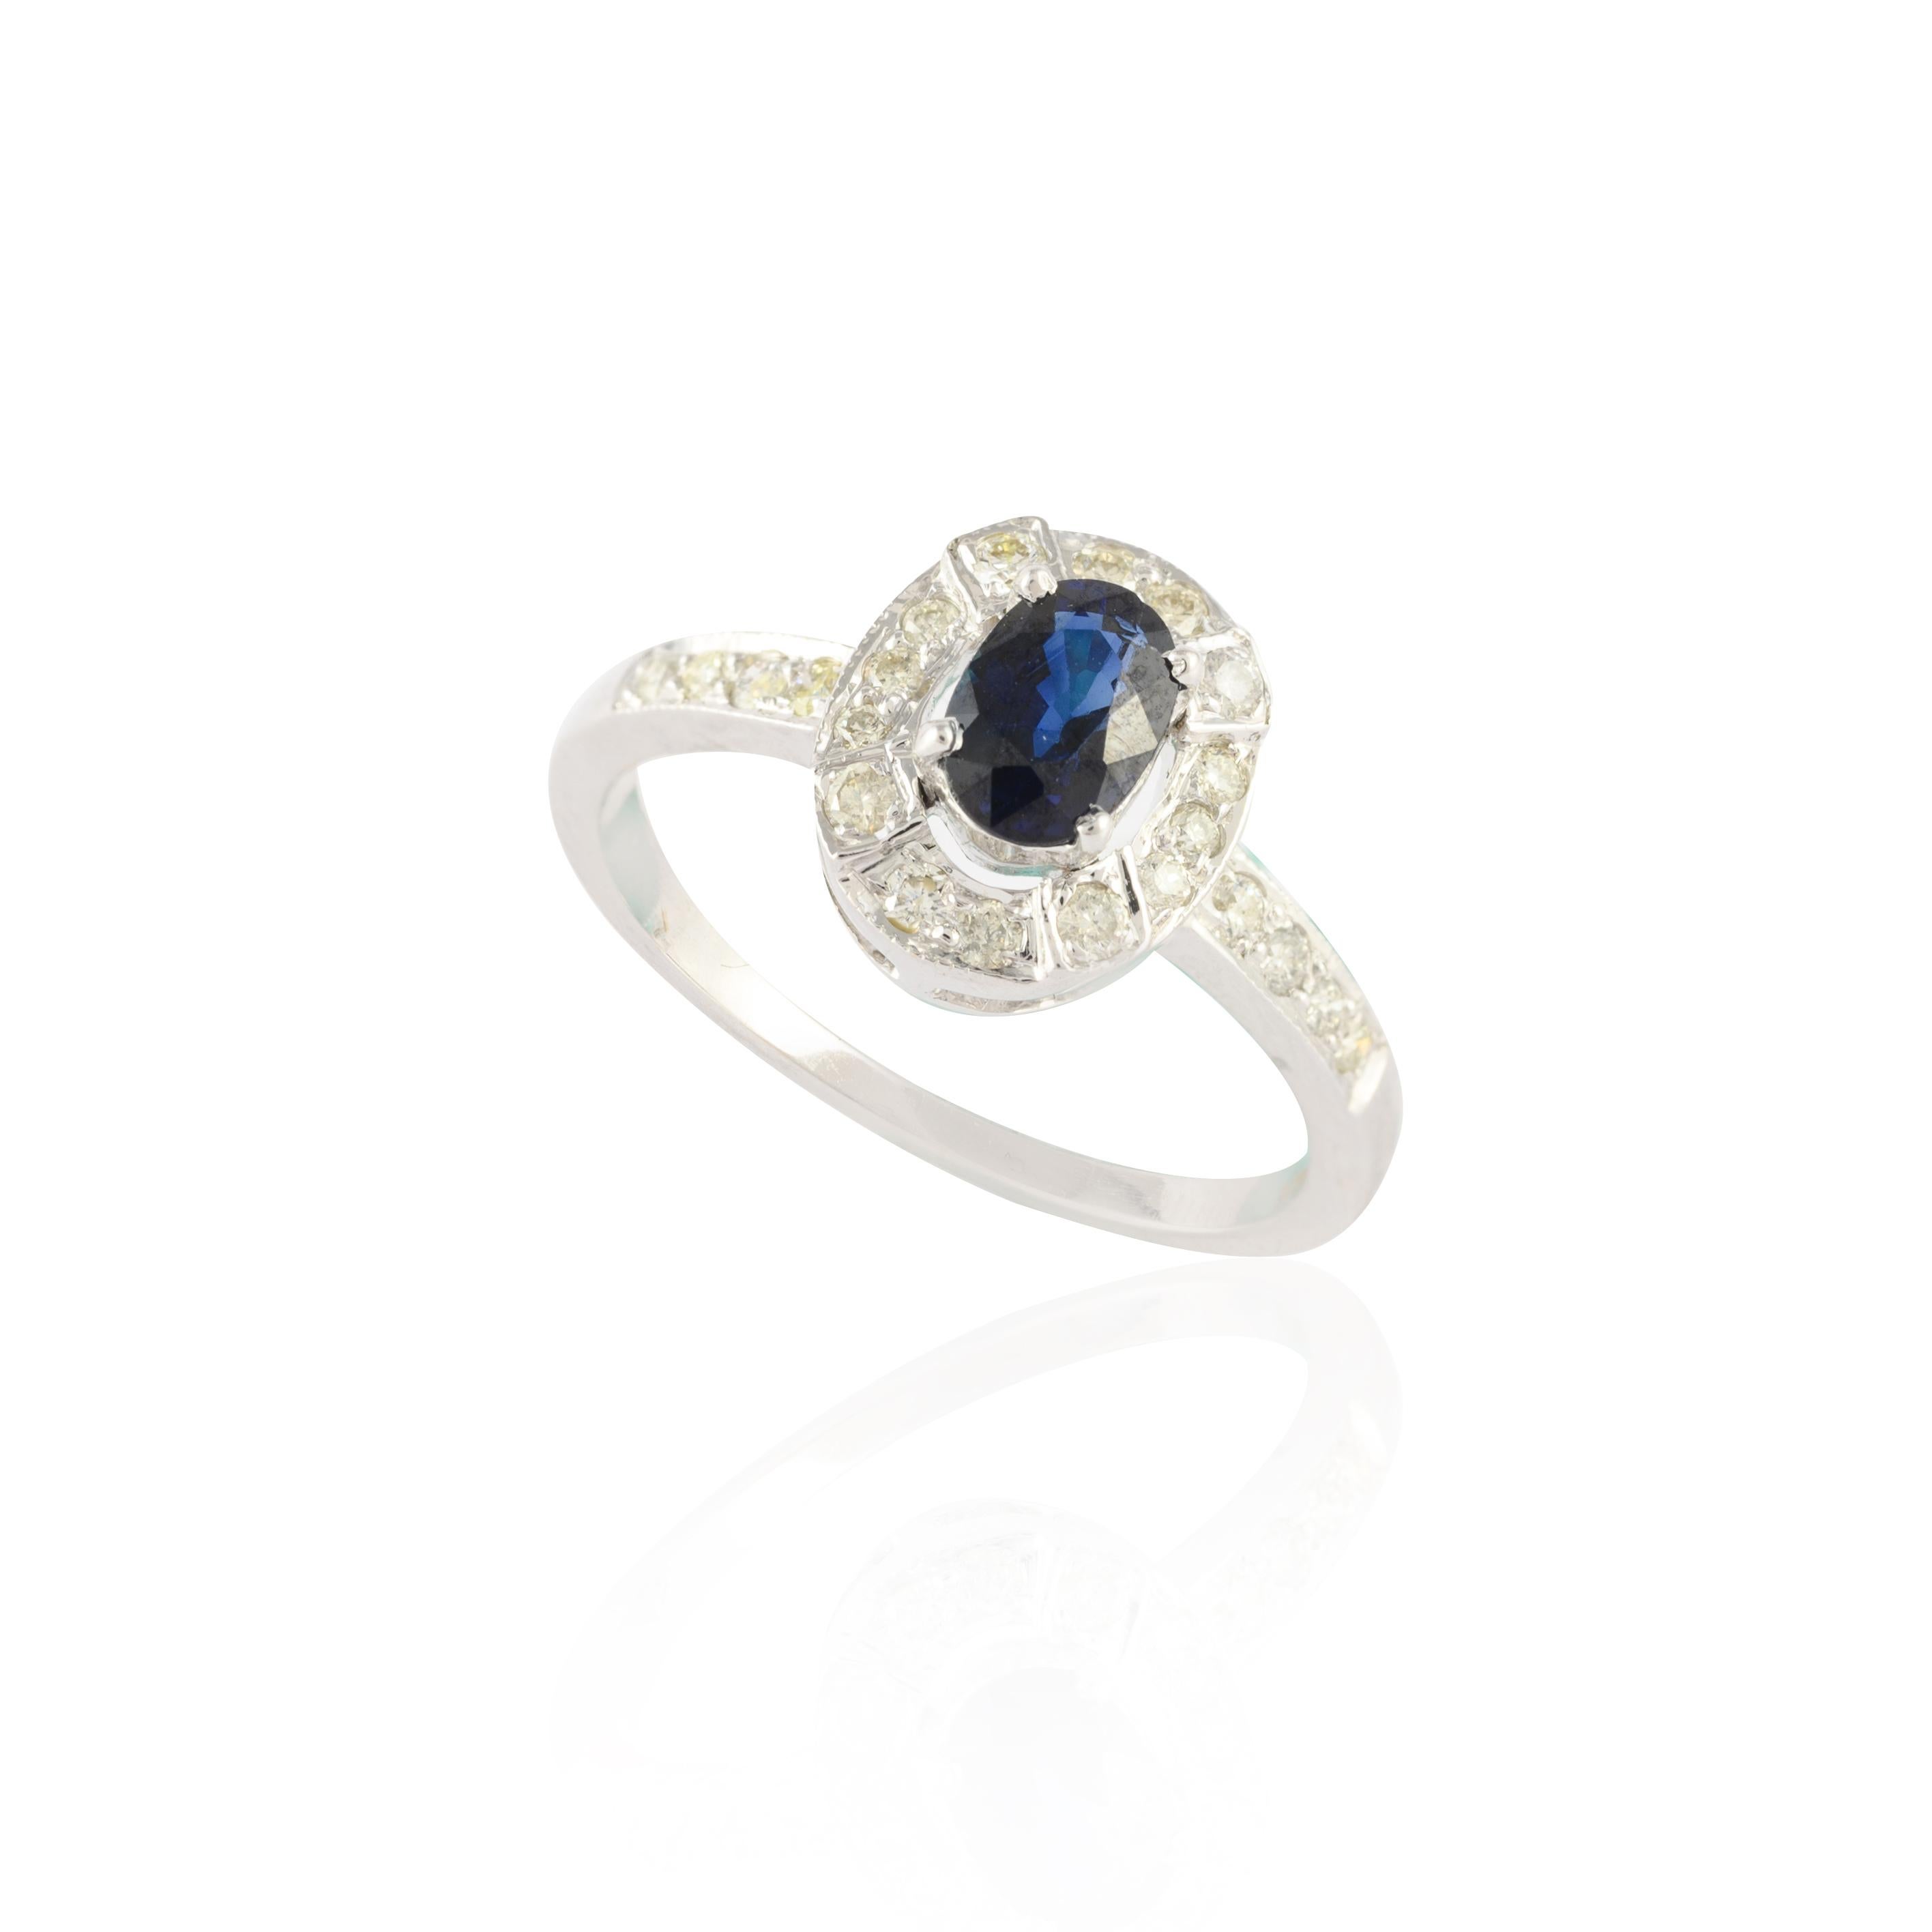 For Sale:  Simple 14K Solid White Gold Halo Diamond and Blue Sapphire Women Engagement Ring 8